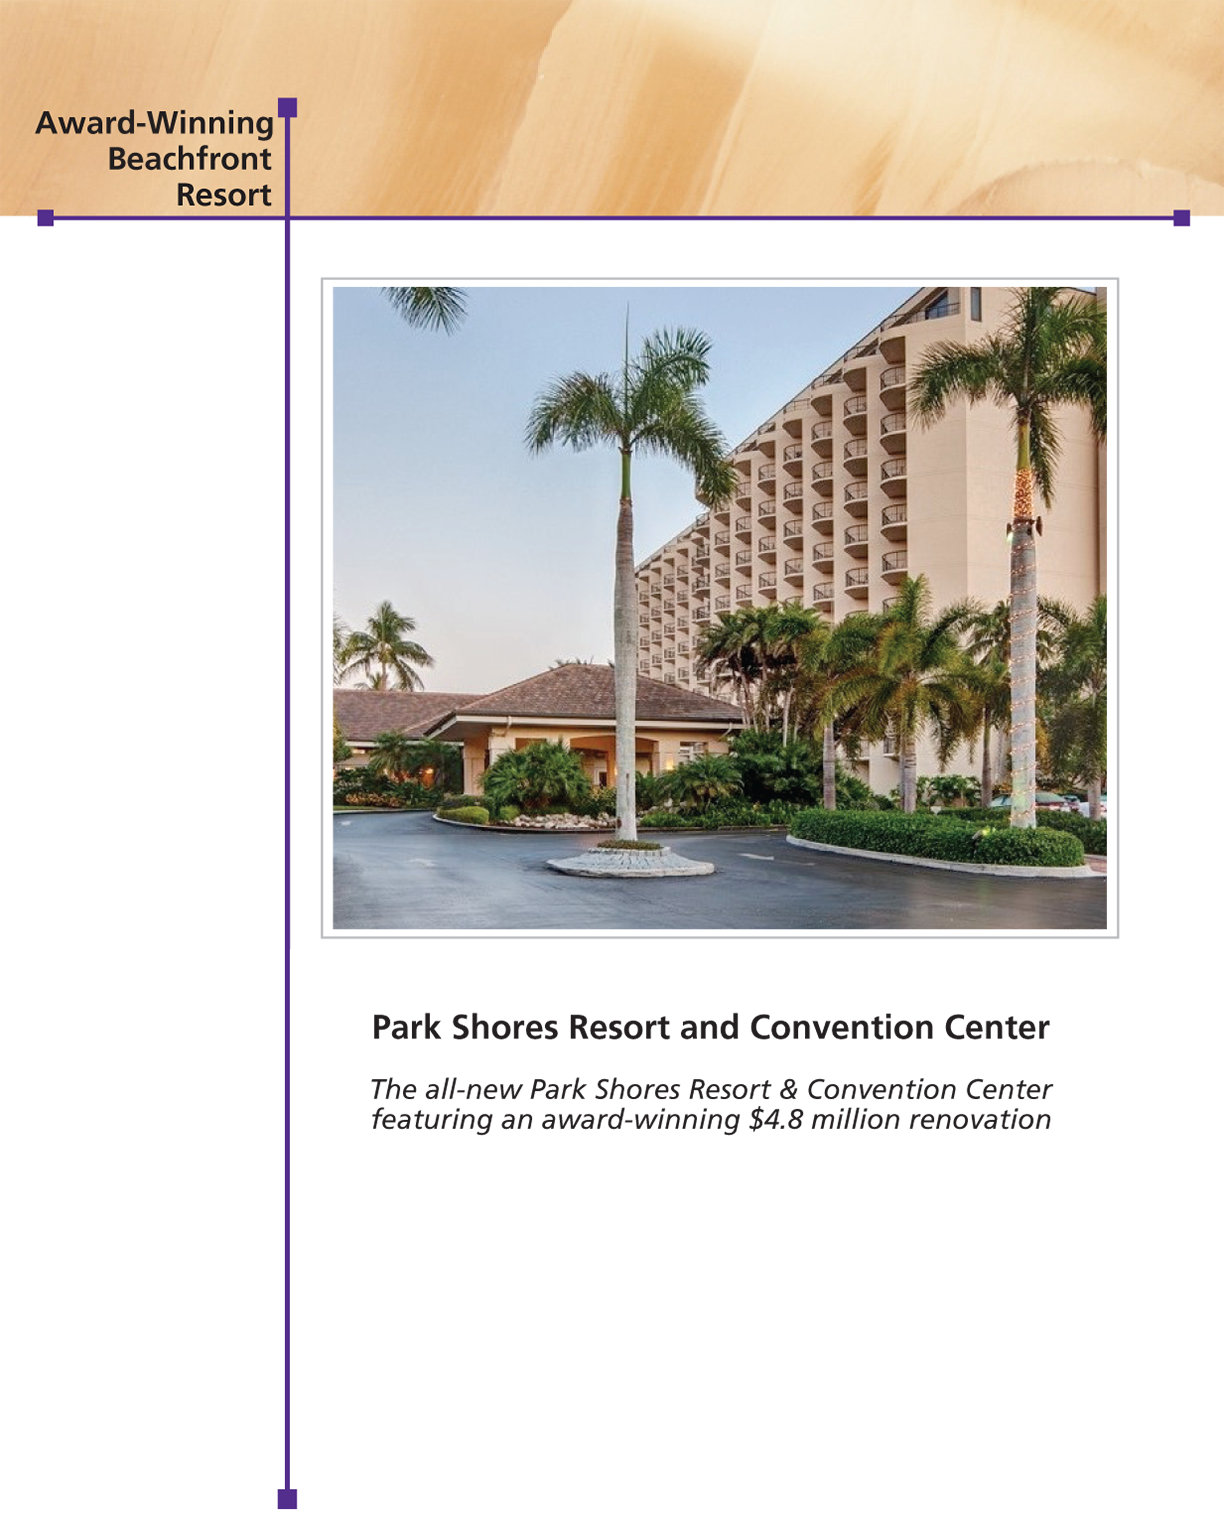 A page titled “Award-Winning Beachfront Resort” shows a beach resort photo with text below it reads “Park Shores Resort and Convention Center; The all-new Park Shores Resort & Convention Center featuring an award-winning 4.8 million dollars renovation.”